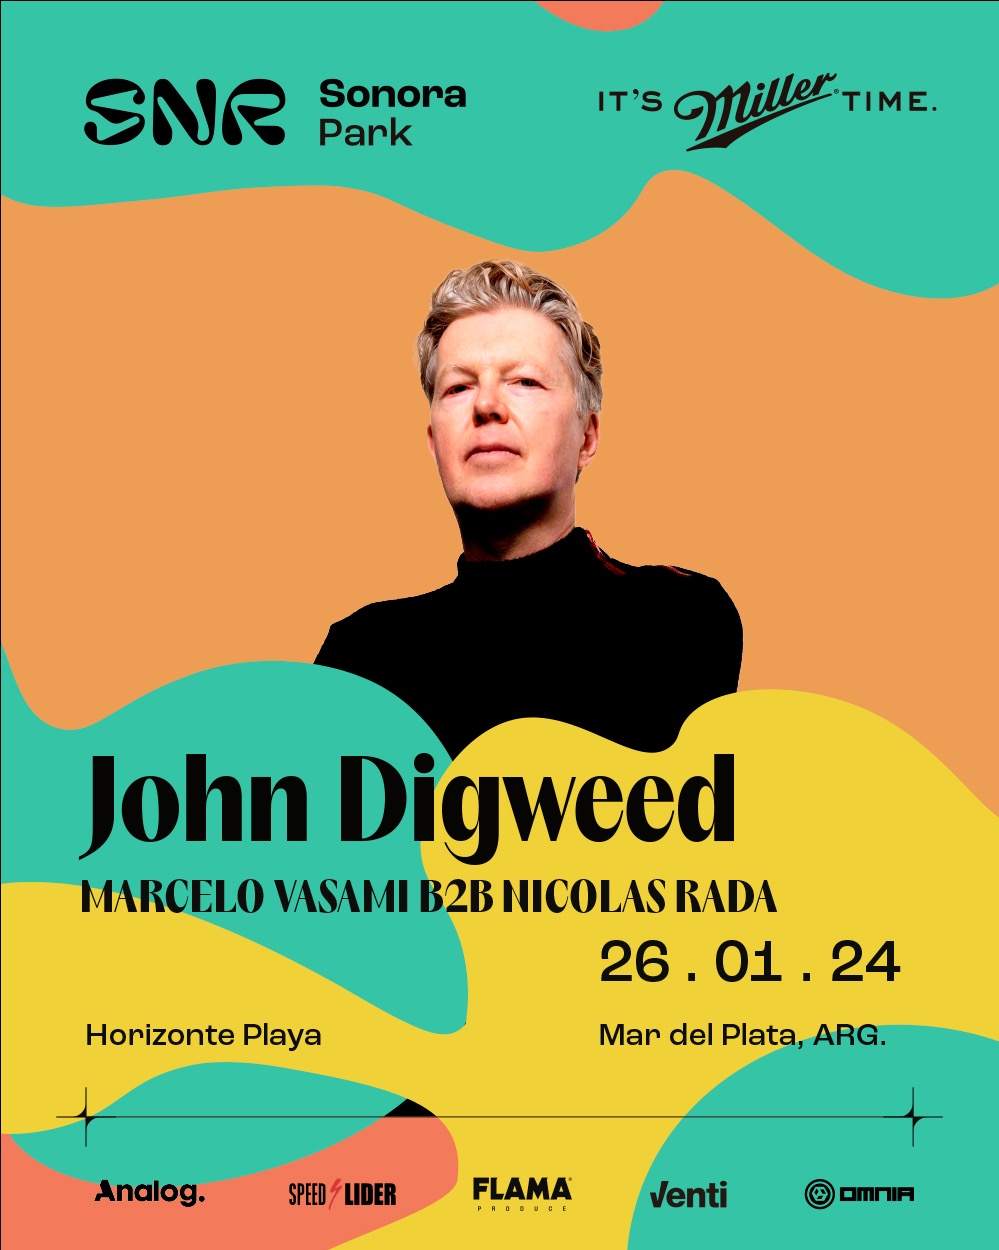 John Digweed - by SONORA - フライヤー表